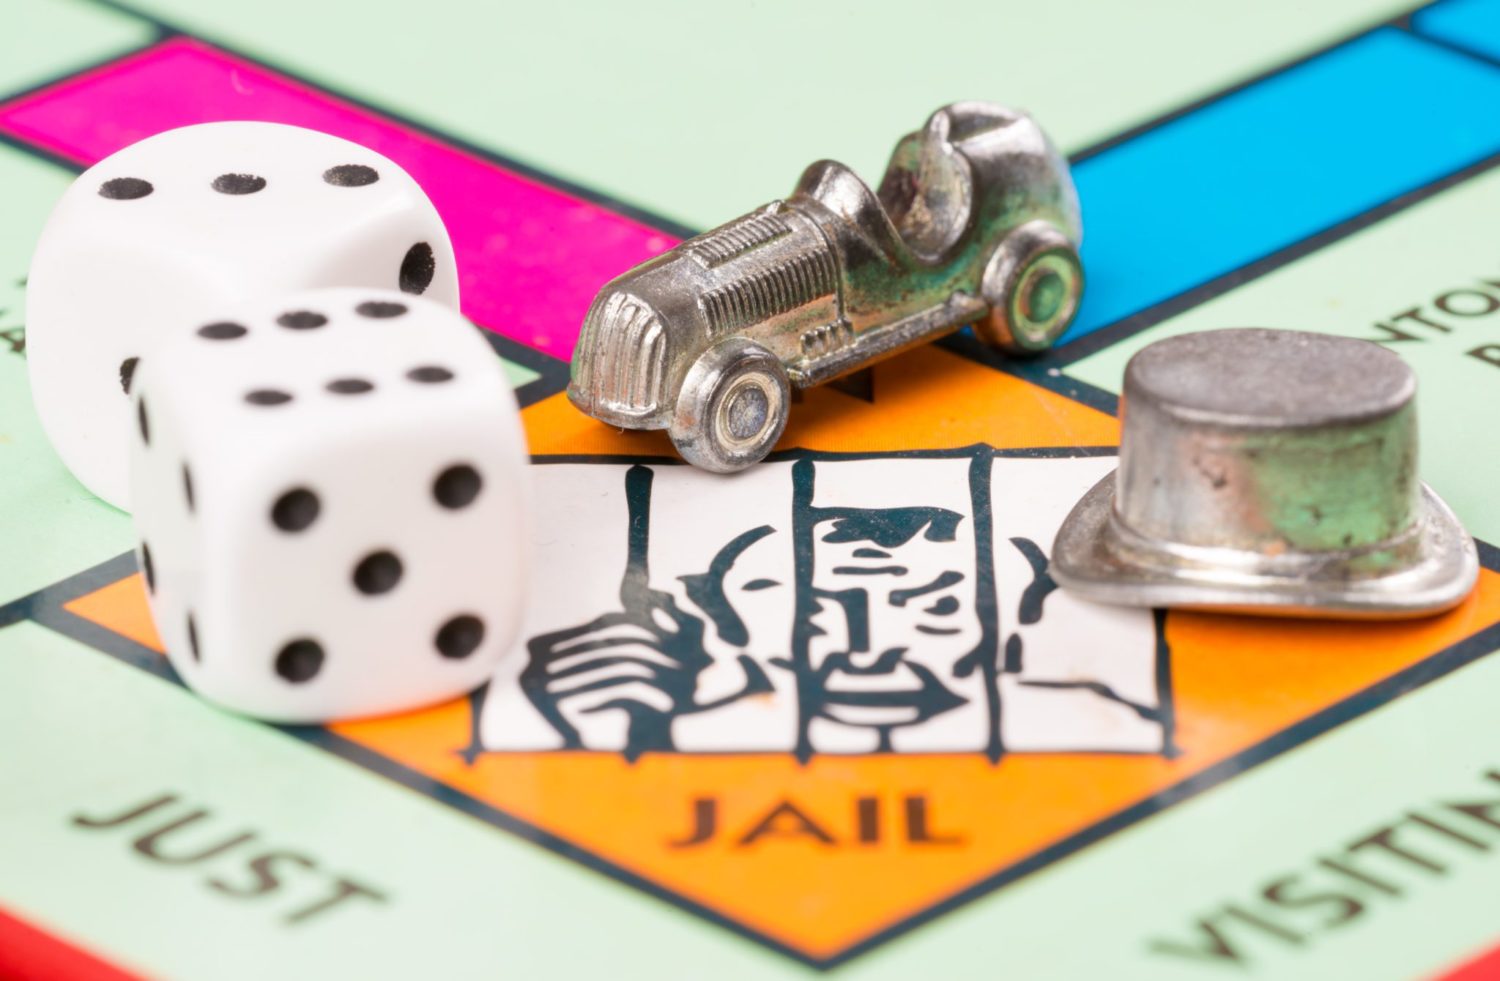 It's a crime to not know the Monopoly rules. Learn how to play Monopoly, the classic board game, at www.GameOnFamily.com. Game on!